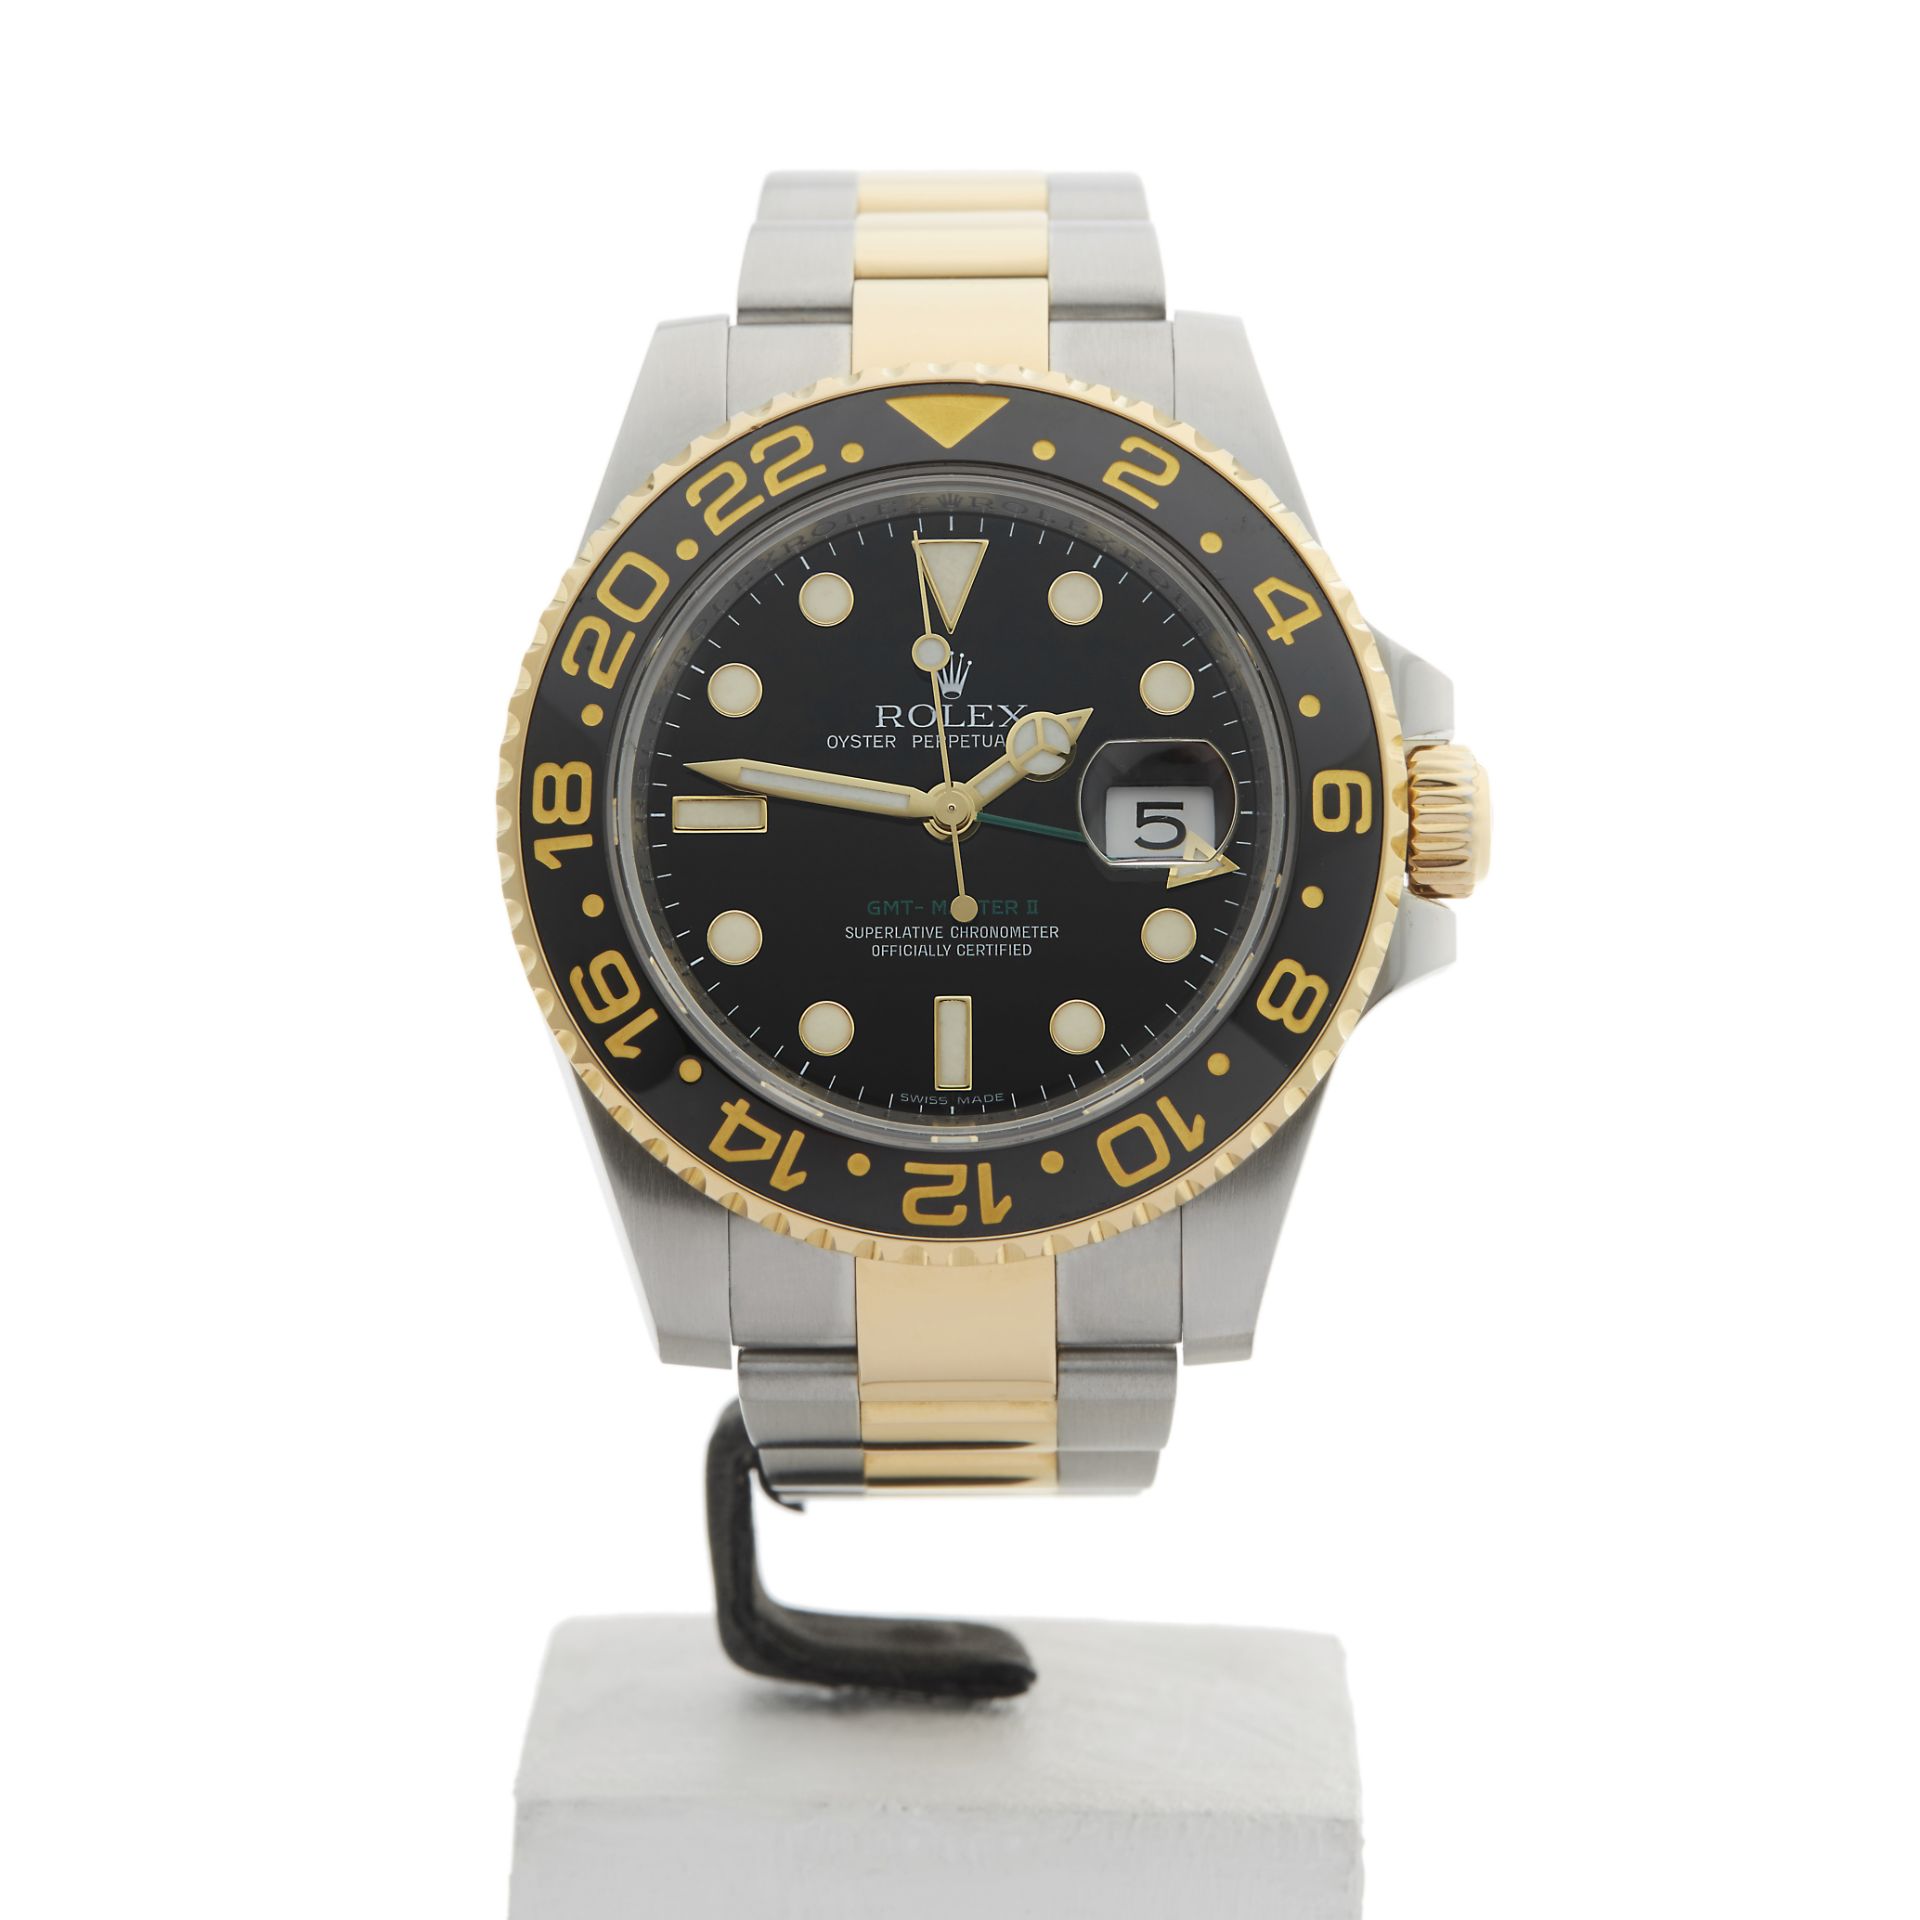 Rolex GMT-Master II 40mm Stainless Steel & 18k Yellow Gold - 116713 - Image 2 of 9